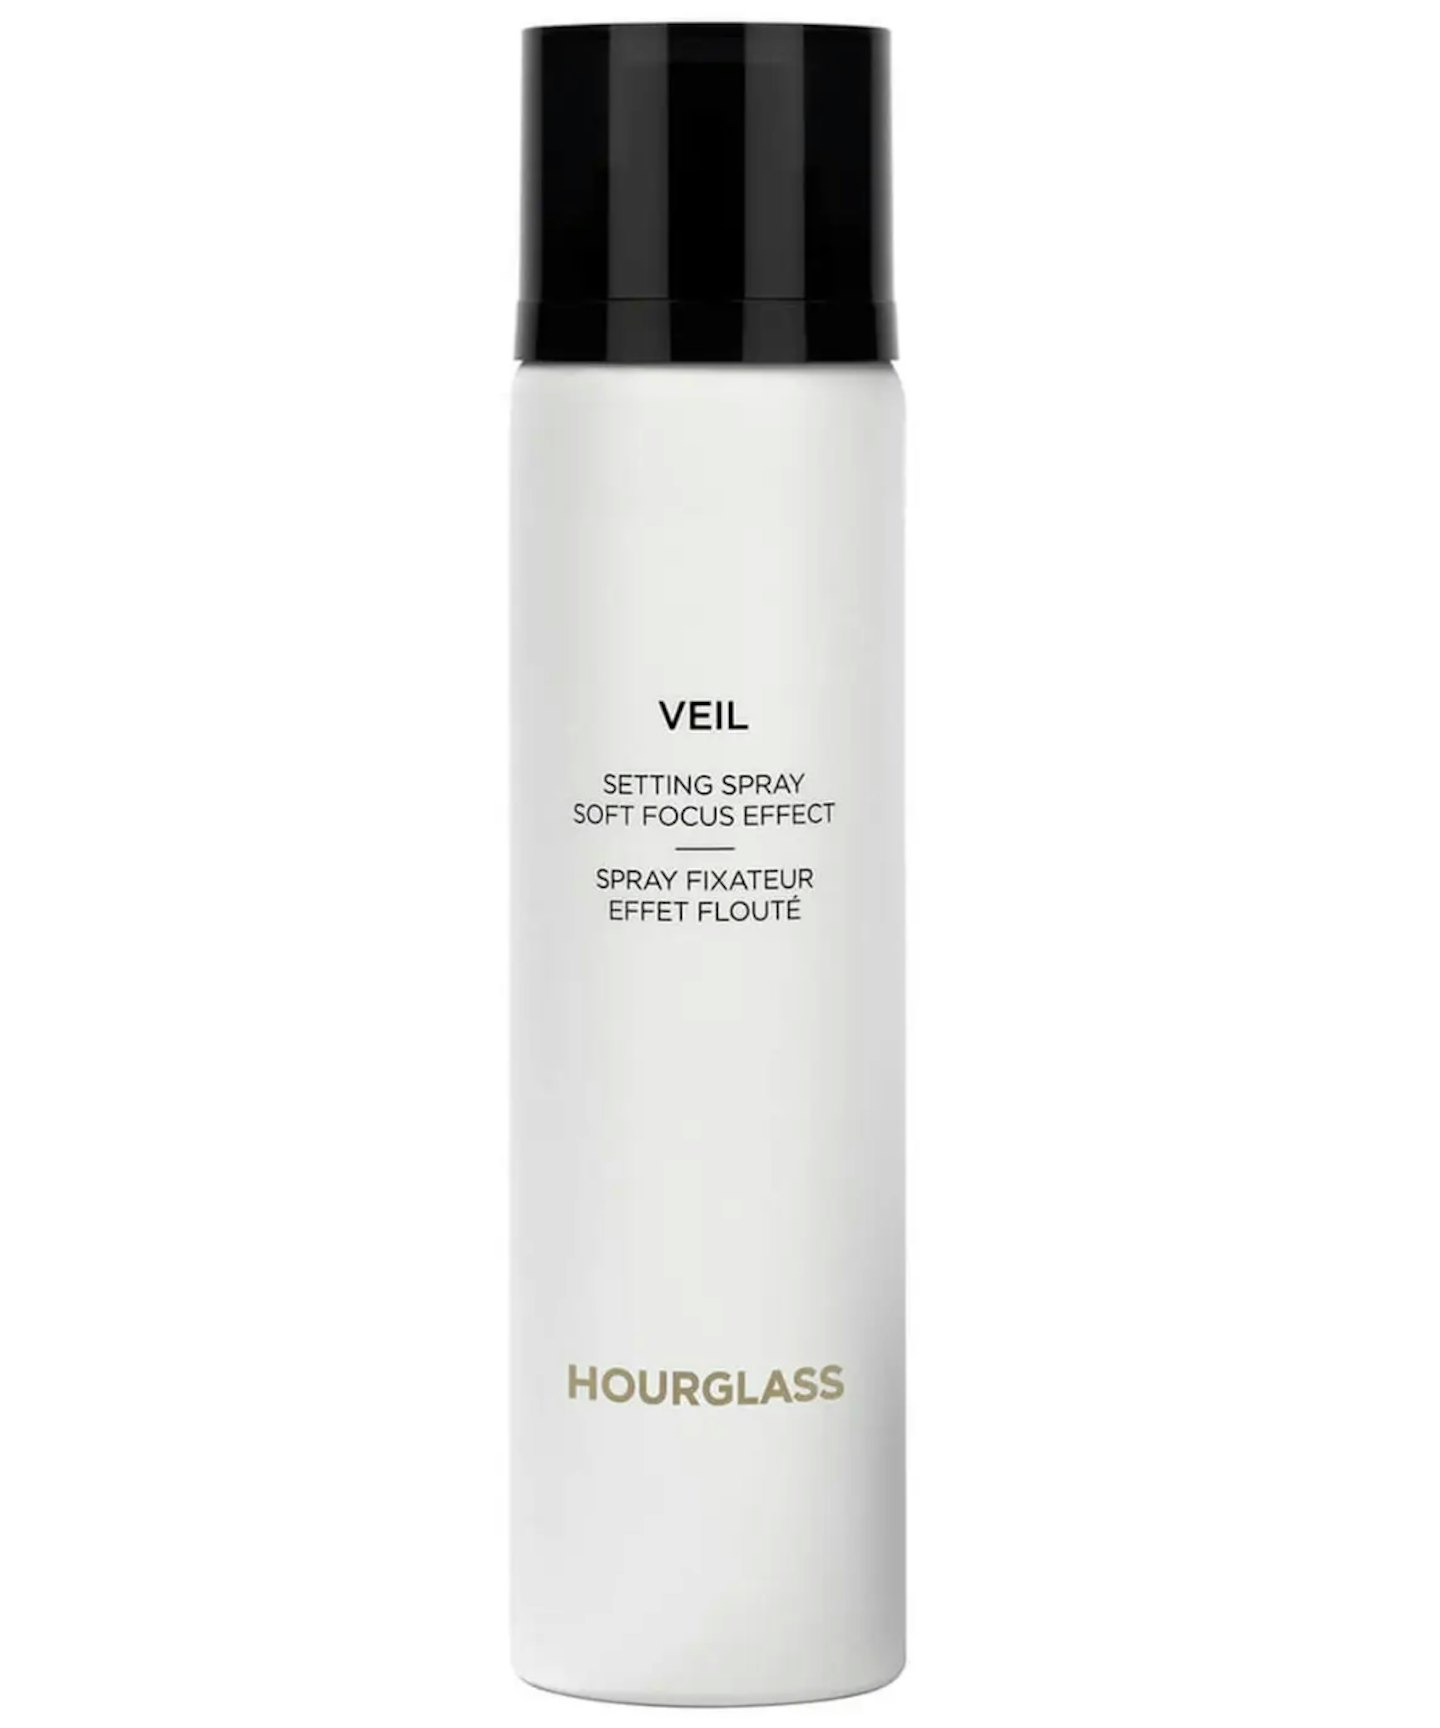 A picture of the Hourglass Veil Soft Focus Setting Spray